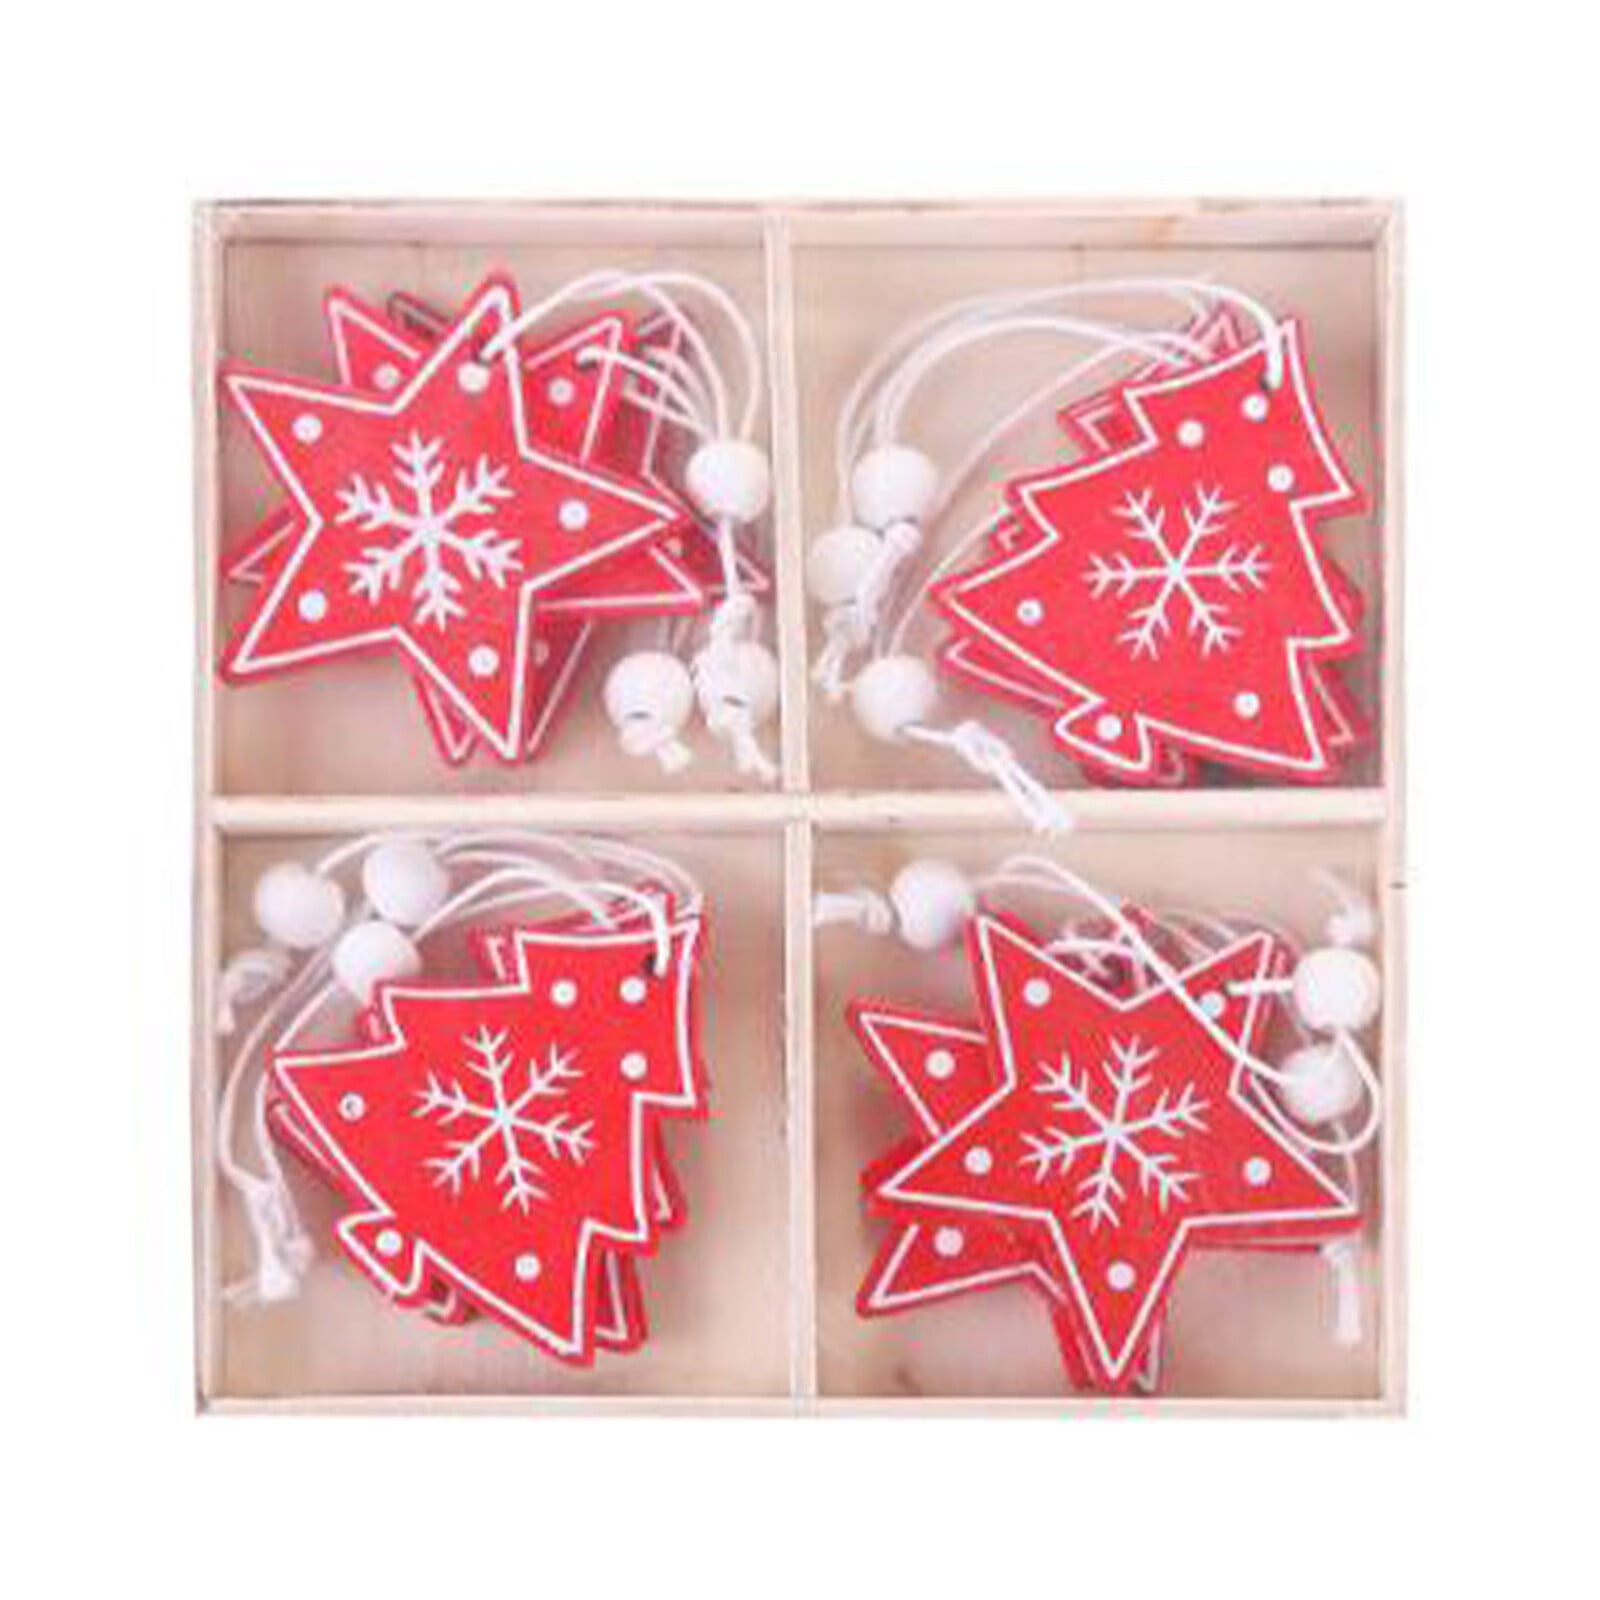 Christmas Decoration A Box Of 12 Red And White Christmas Ornaments In ...